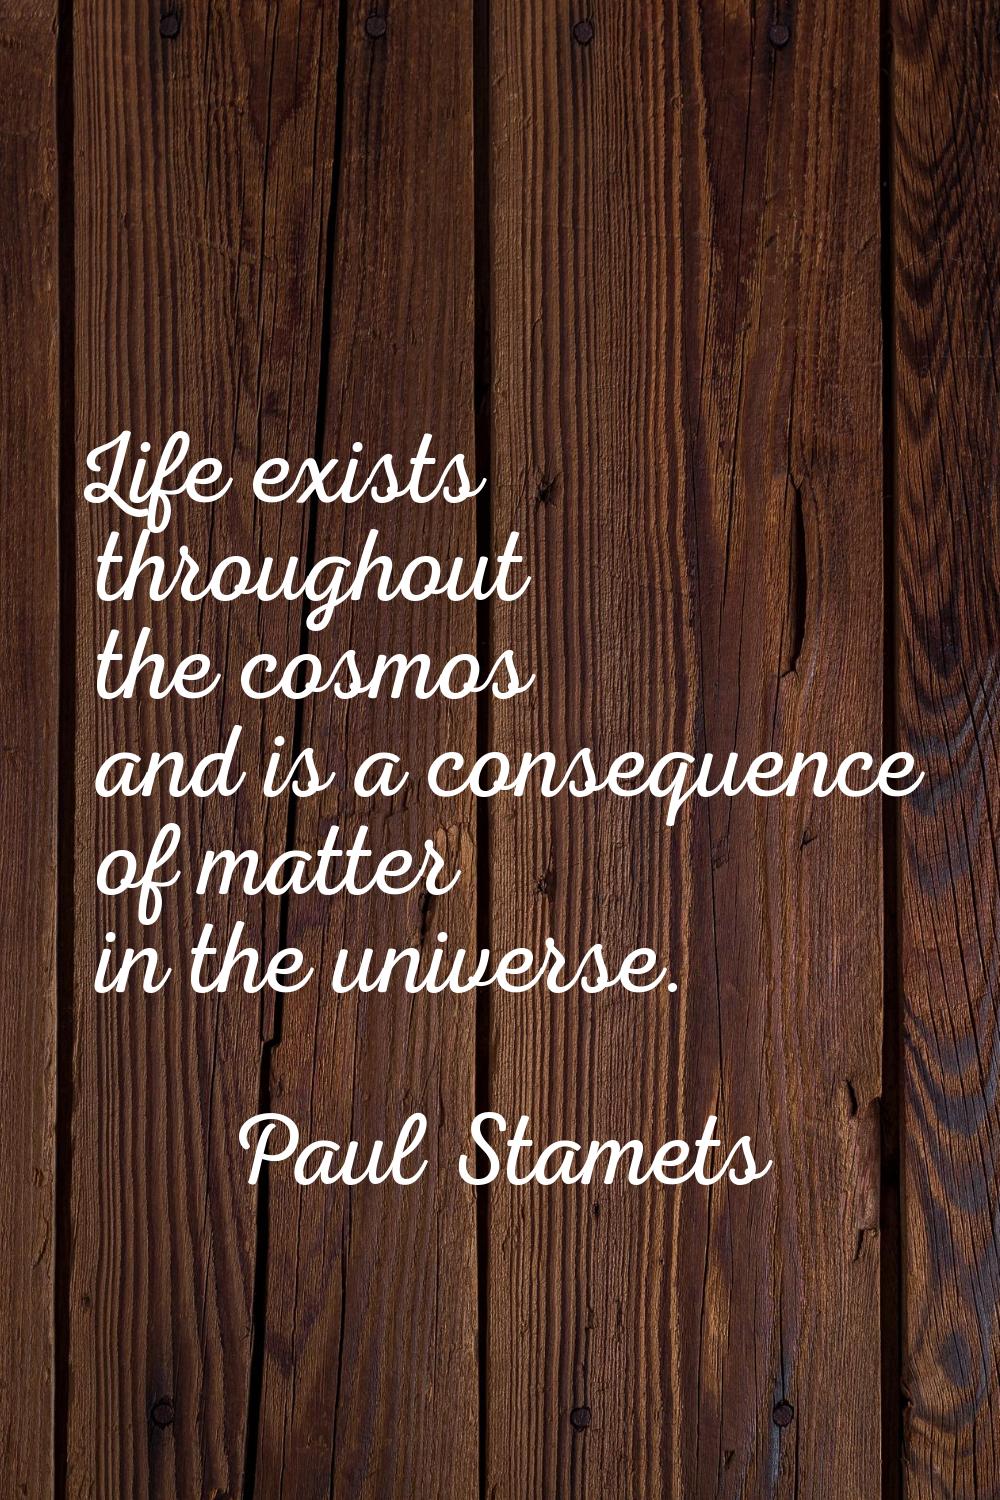 Life exists throughout the cosmos and is a consequence of matter in the universe.